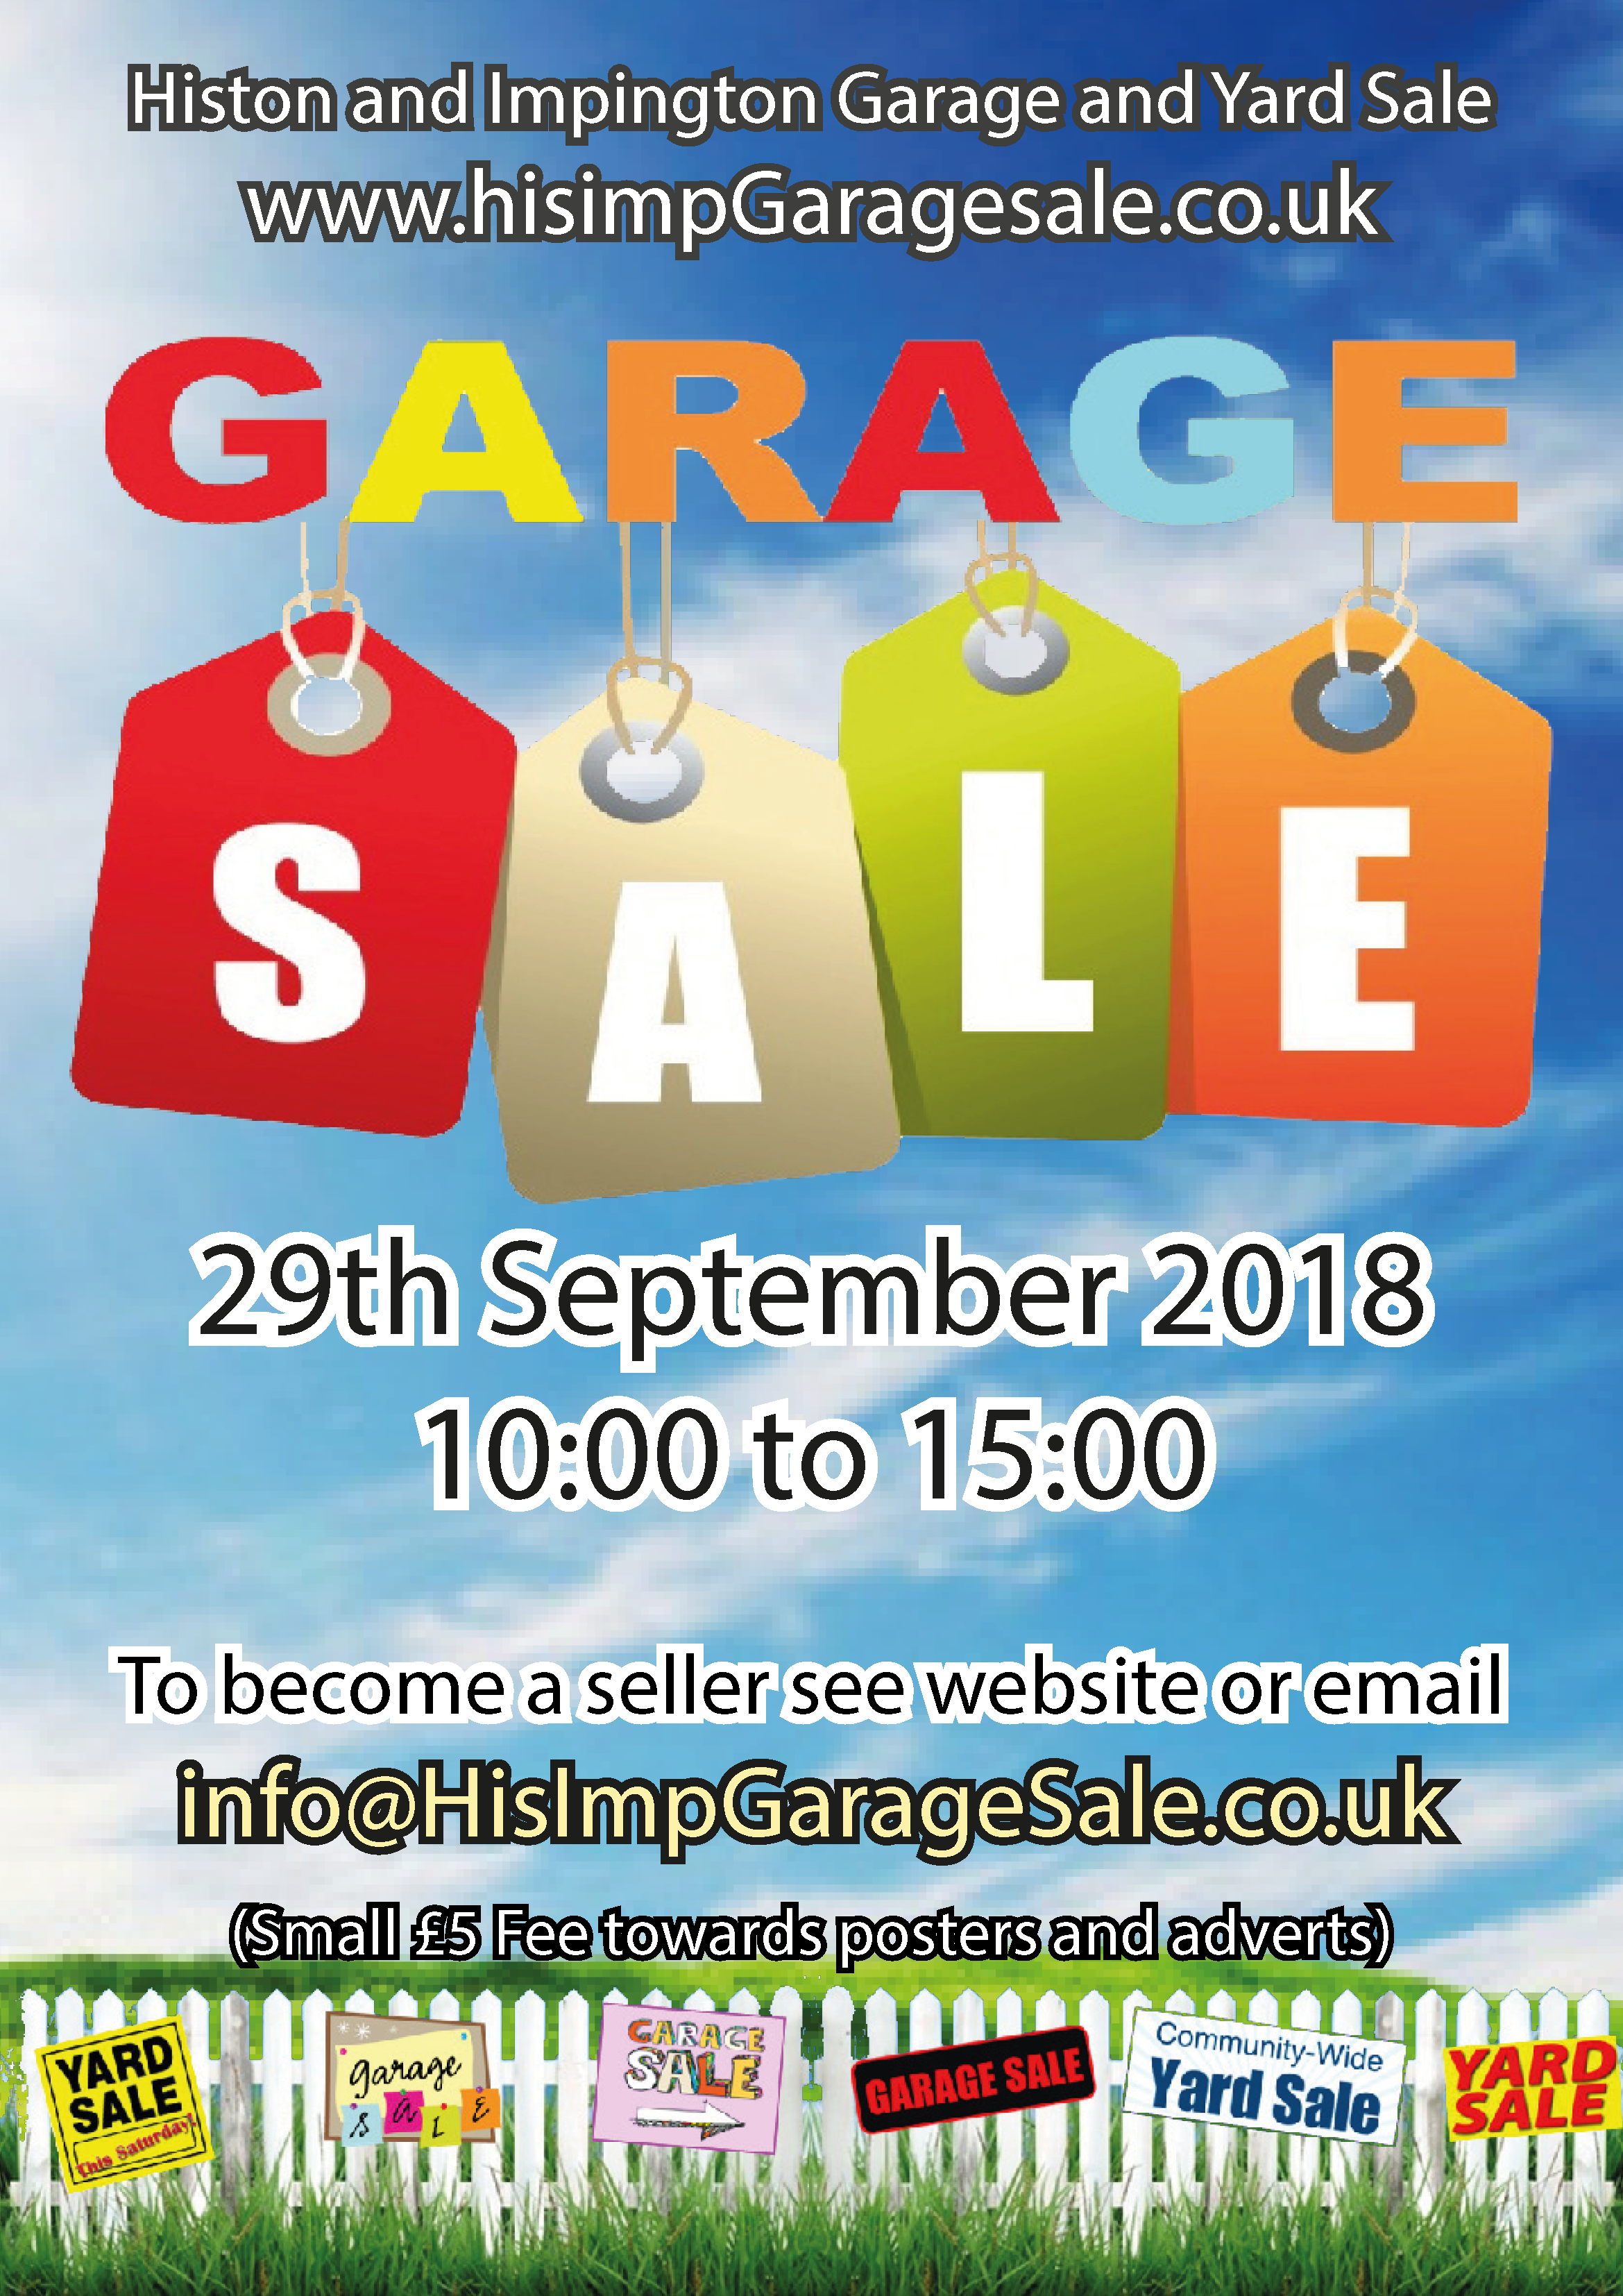 village-yard-sale-29th-sept-2018-10am-to-3pm-news-for-histon-and